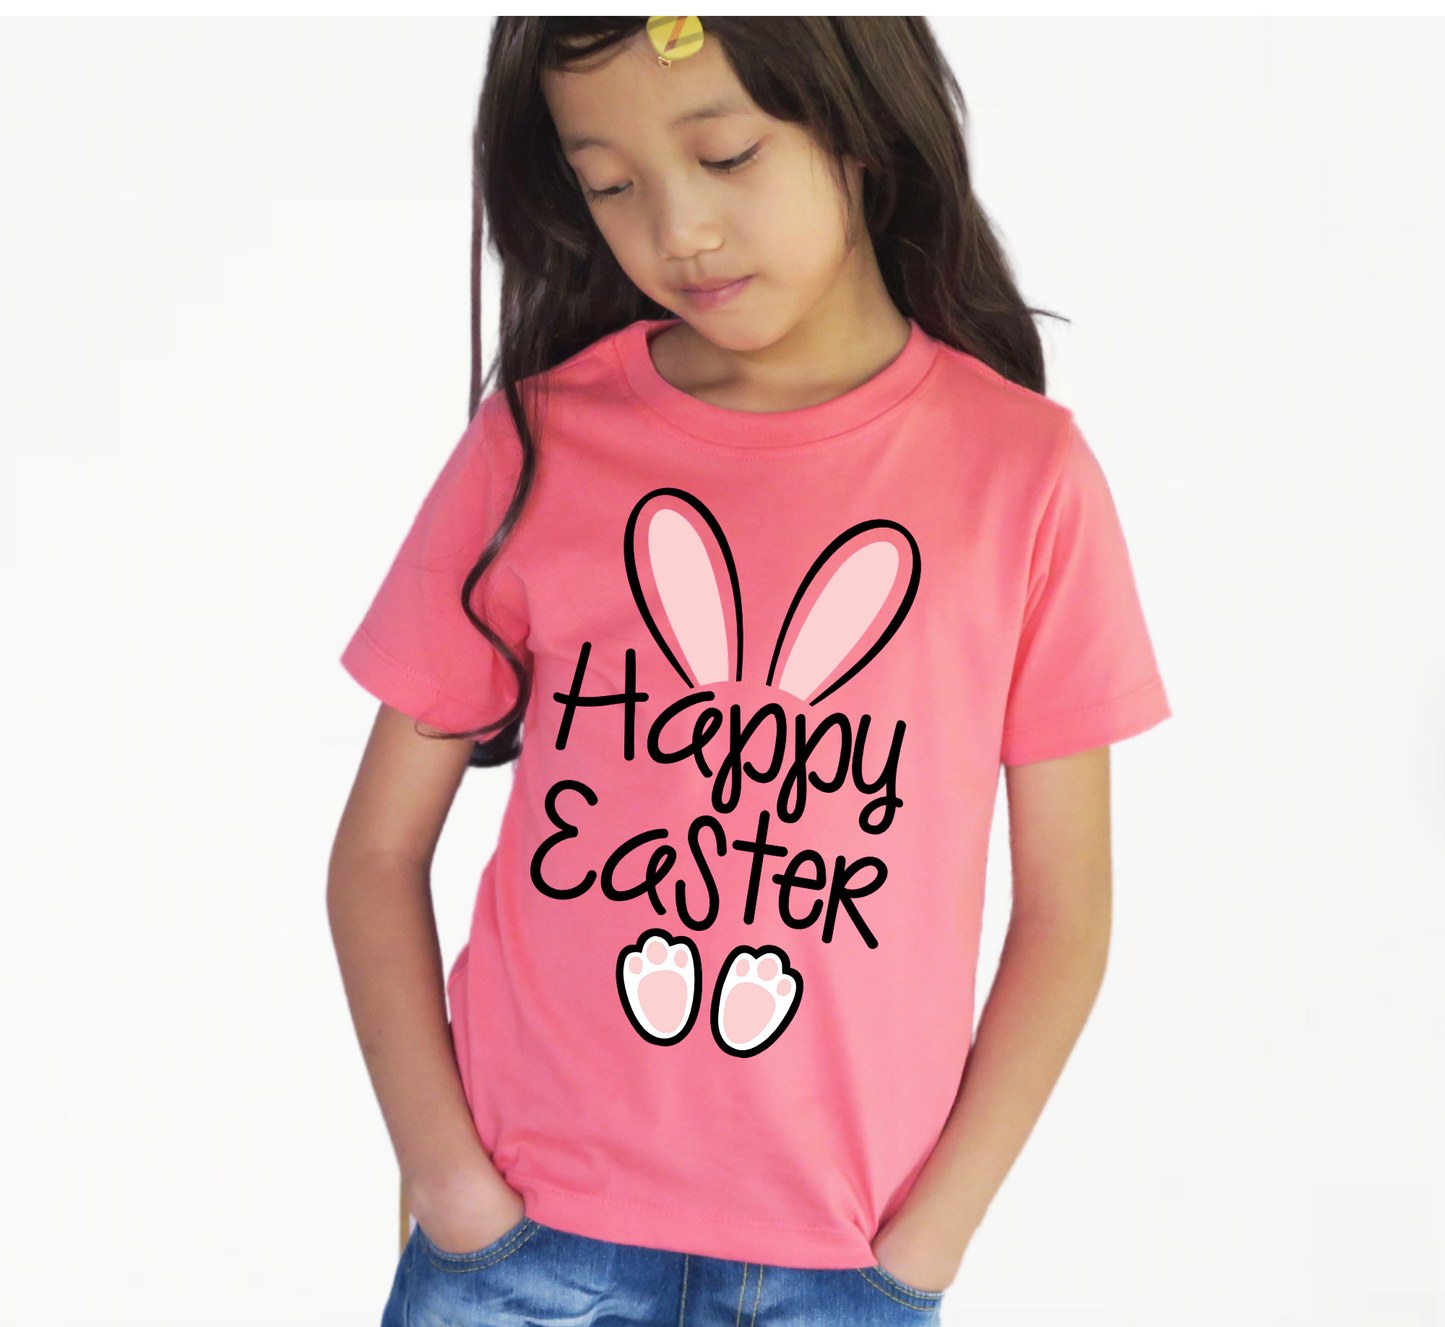 Happy Easter Bunny Transfer Sublimation